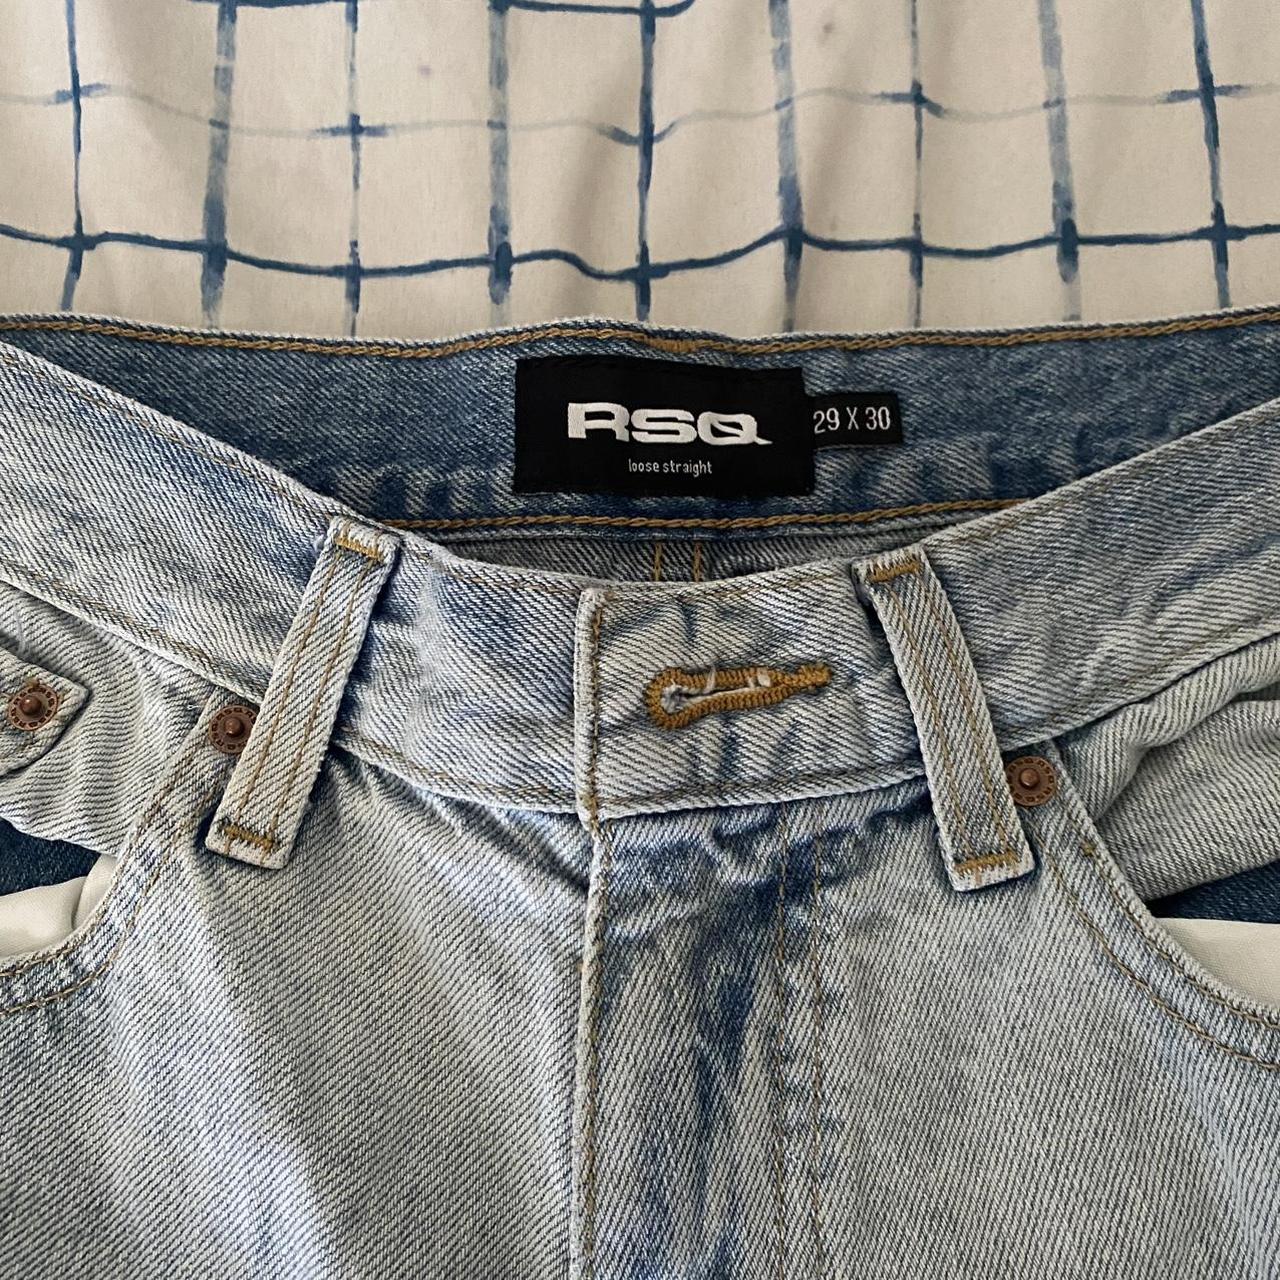 RSQ Loose Straight Jeans No flaws! 29x30 #rsq - Depop